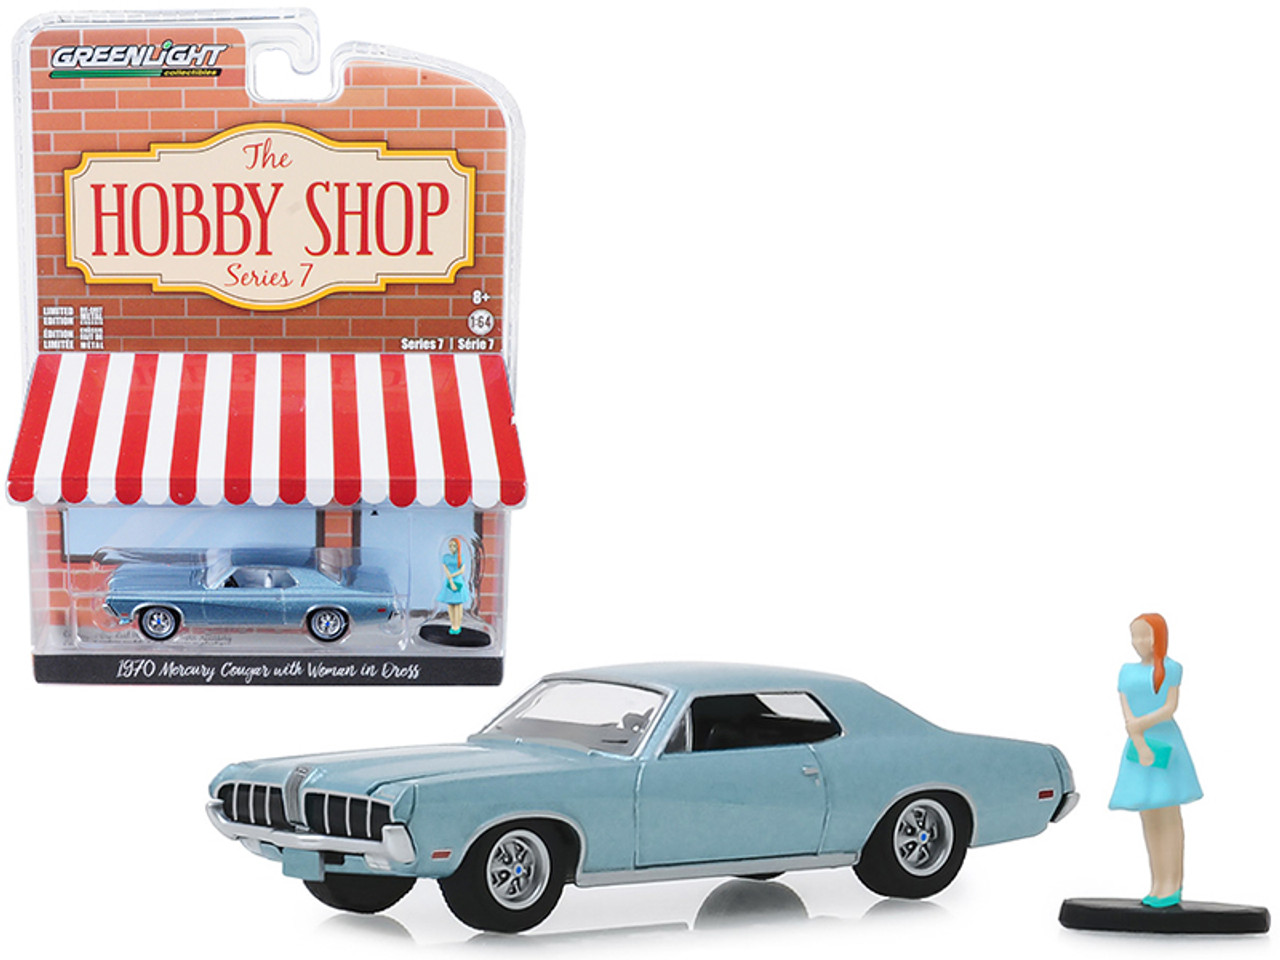 1970 Mercury Cougar Light Blue Metallic with Woman in Dress Figurine "The Hobby Shop" Series 7 1/64 Diecast Model Car by Greenlight